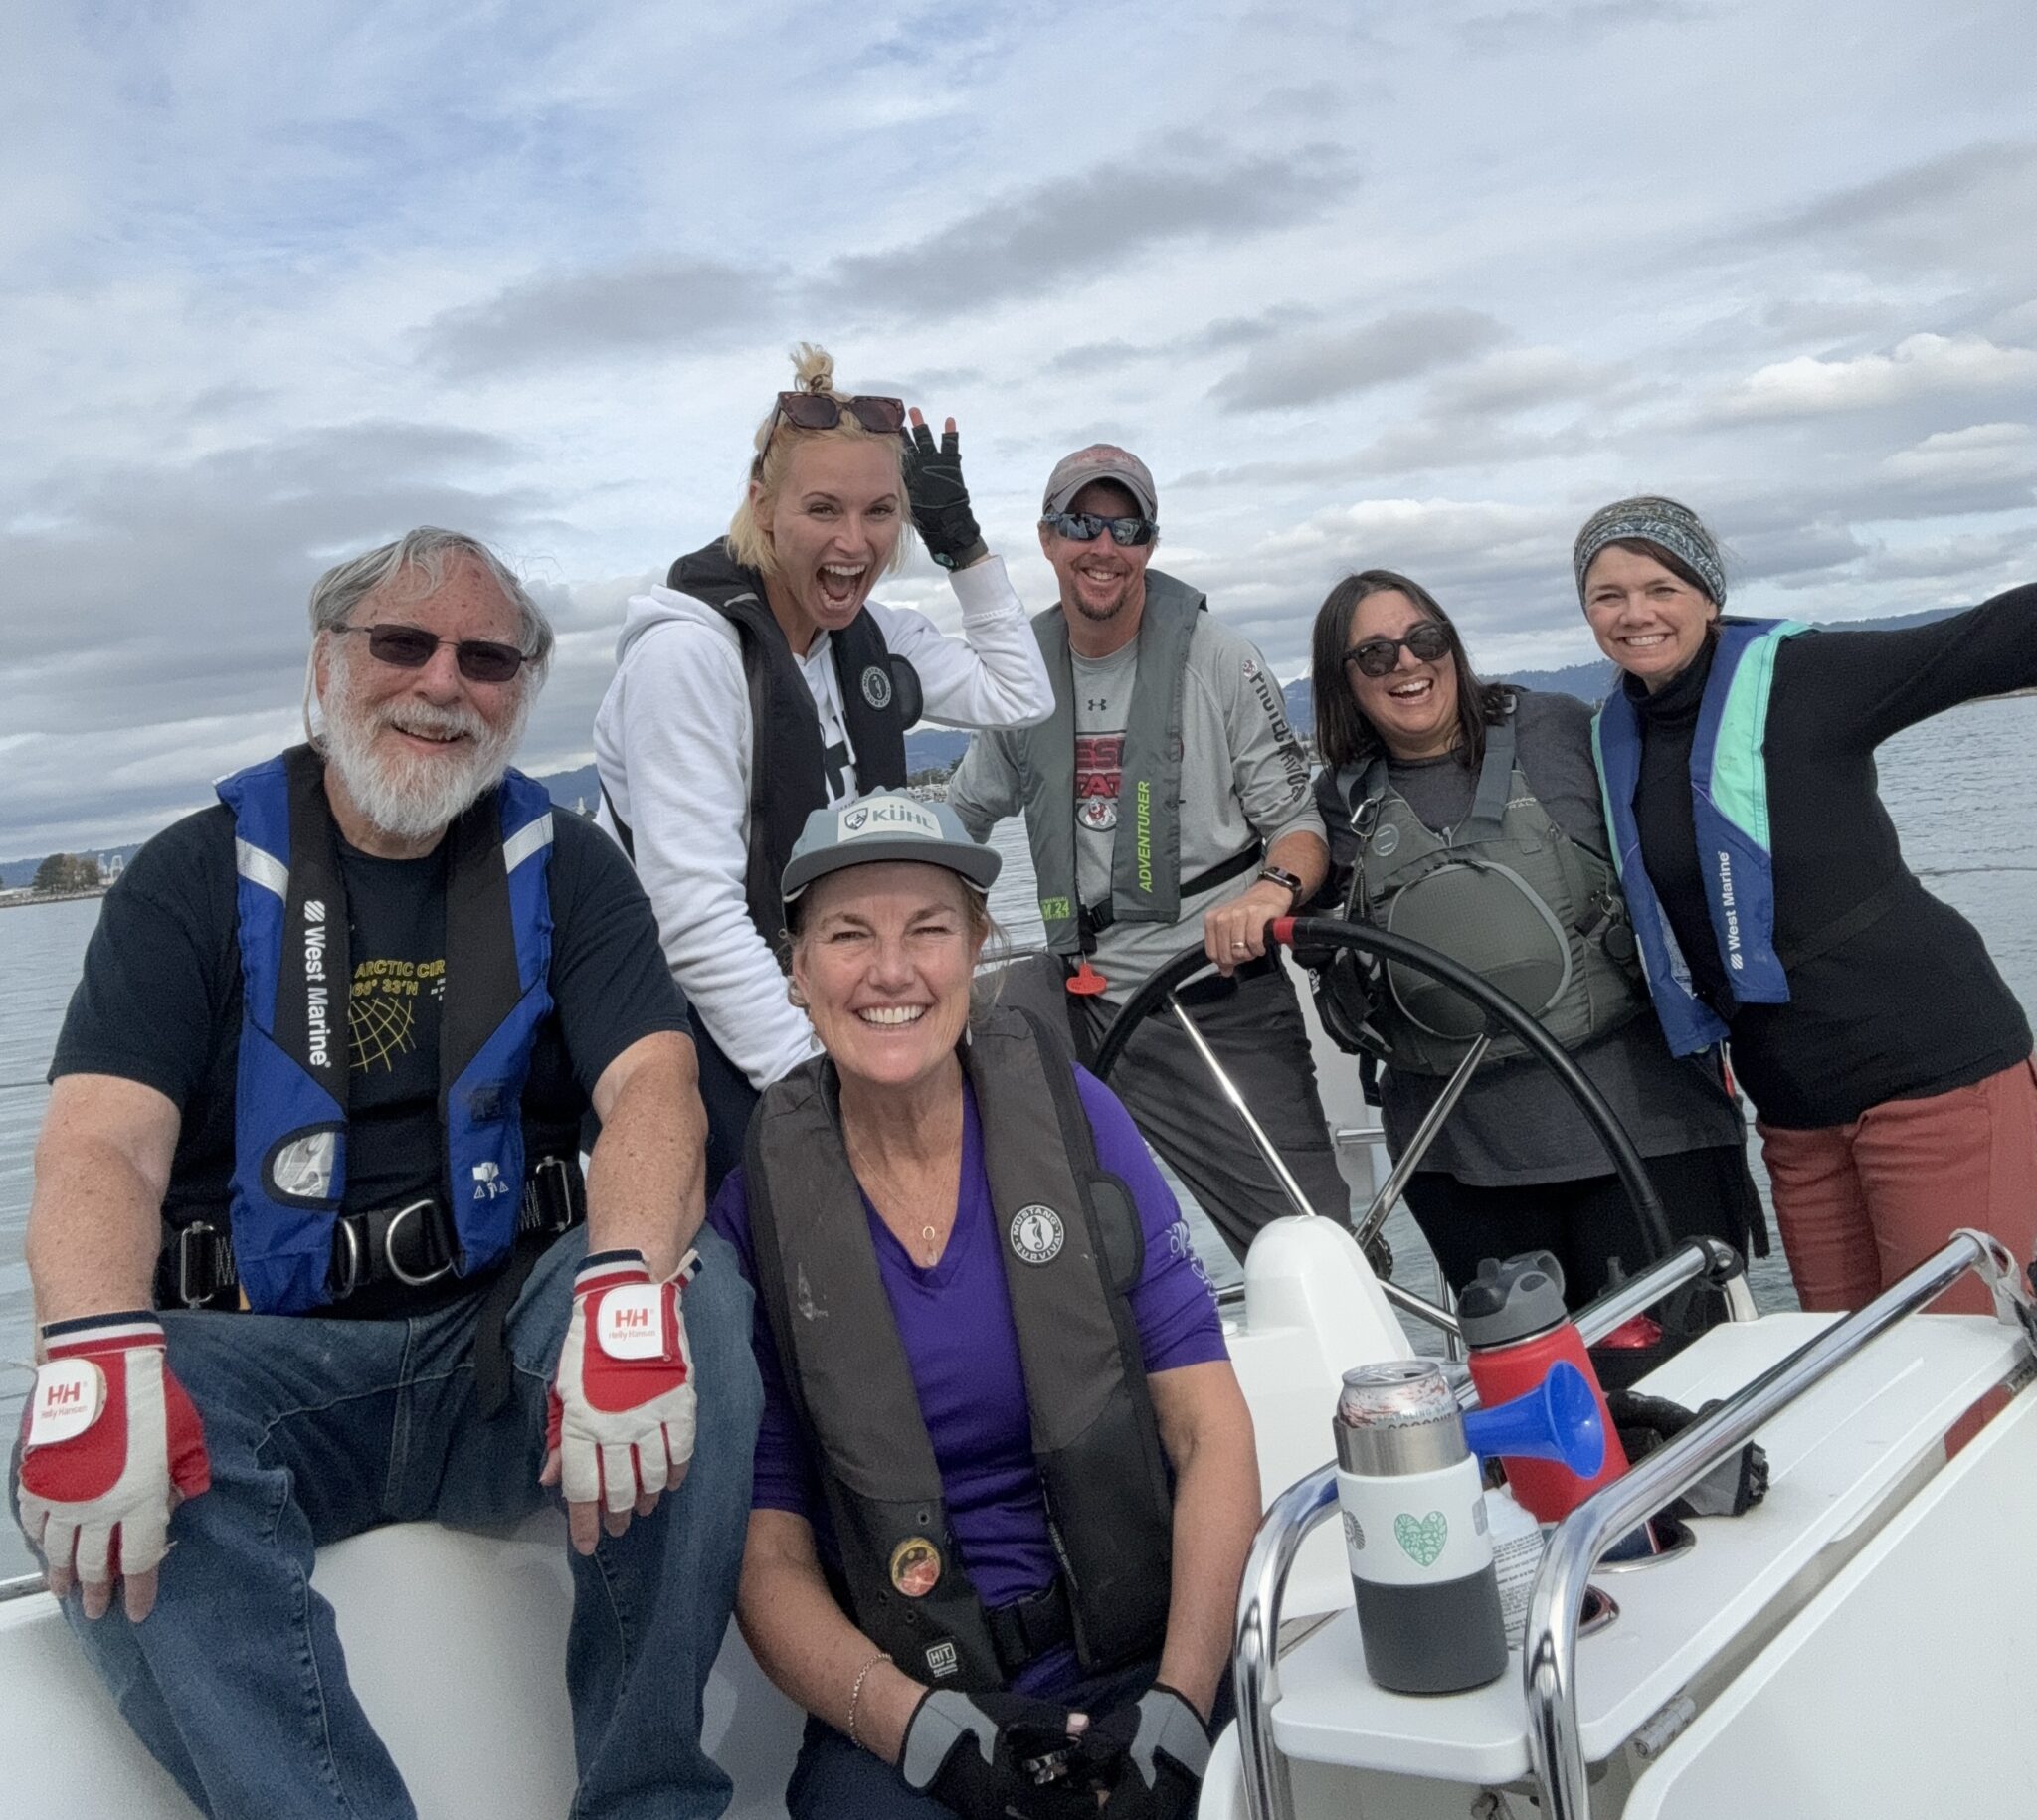 Sunday Sail with members